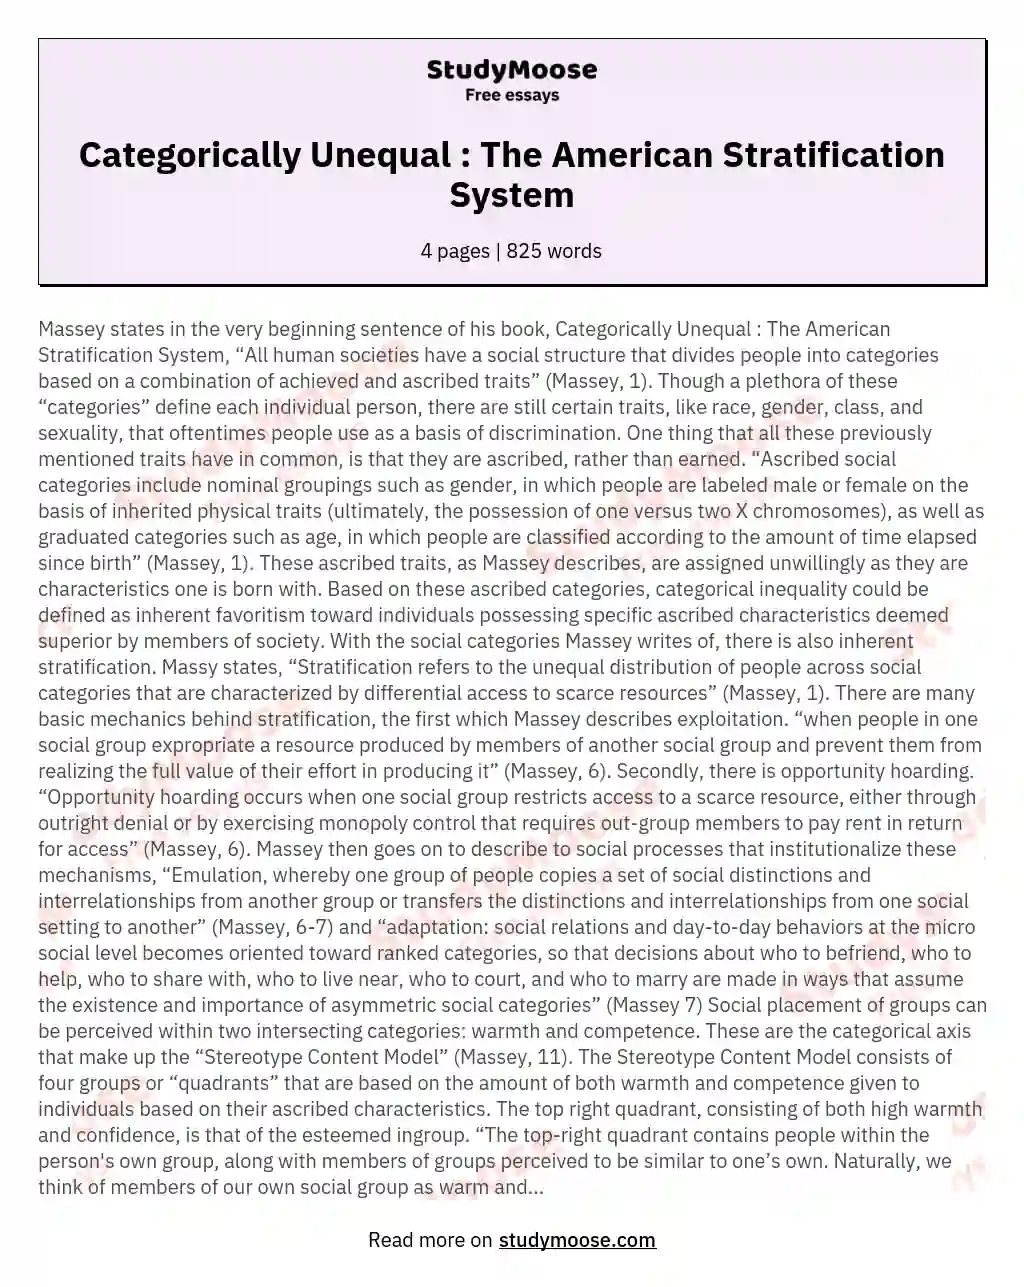 Categorically Unequal : The American Stratification System essay